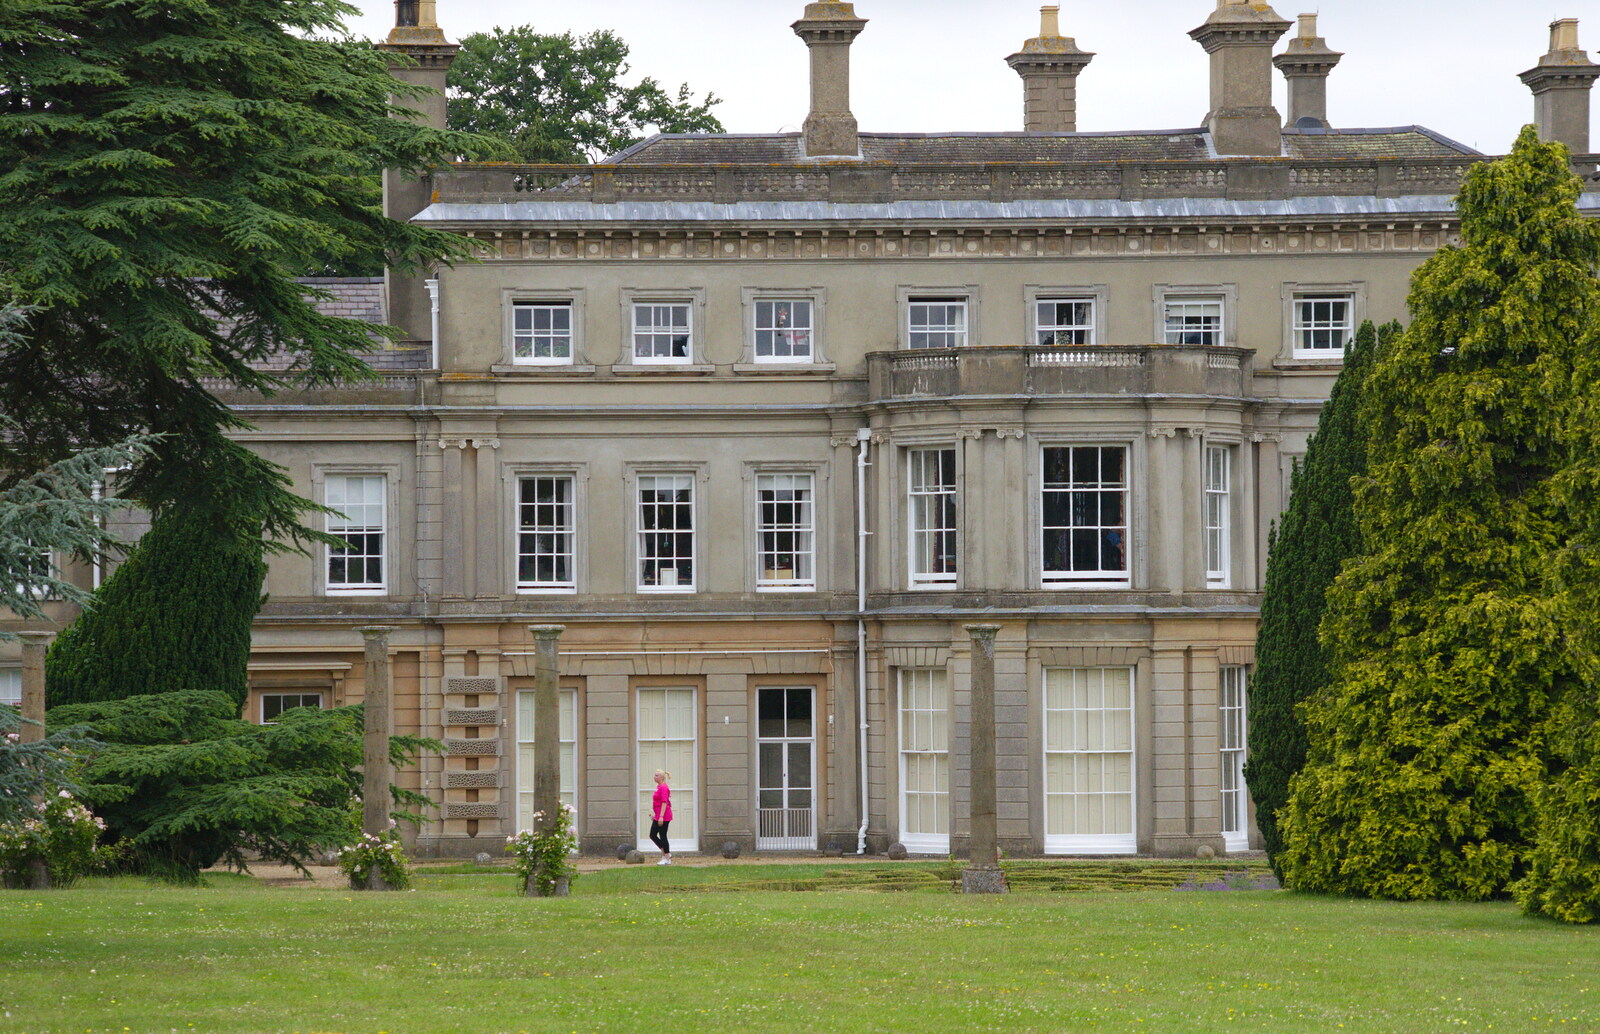 A lone walker trots past Chantry House from Isobel's Race For Life, Chantry Park, Ipswich - 11th June 2014